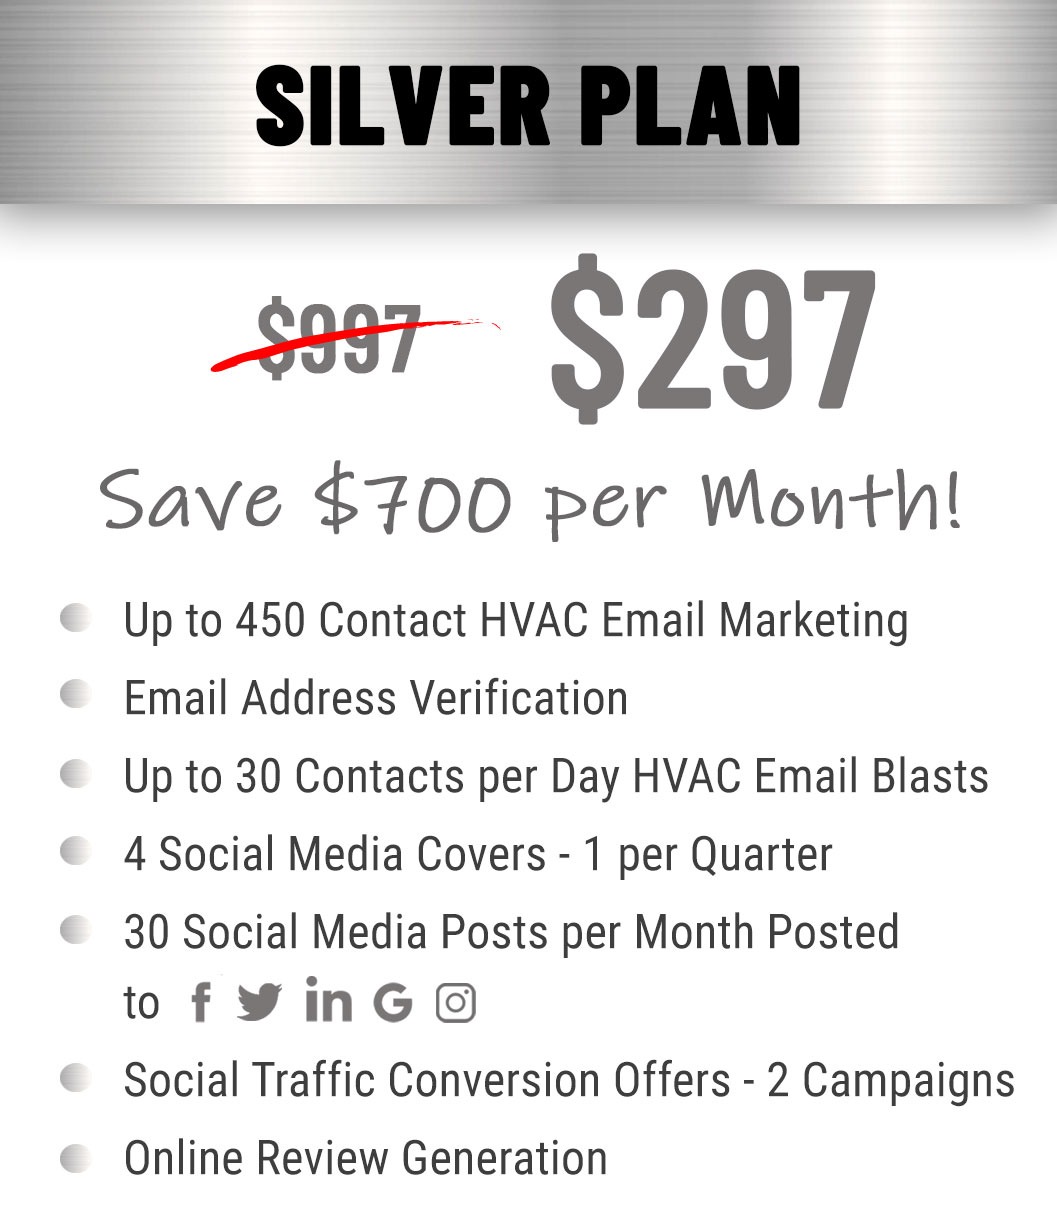 Silver Plan Pricing and Features HVAC